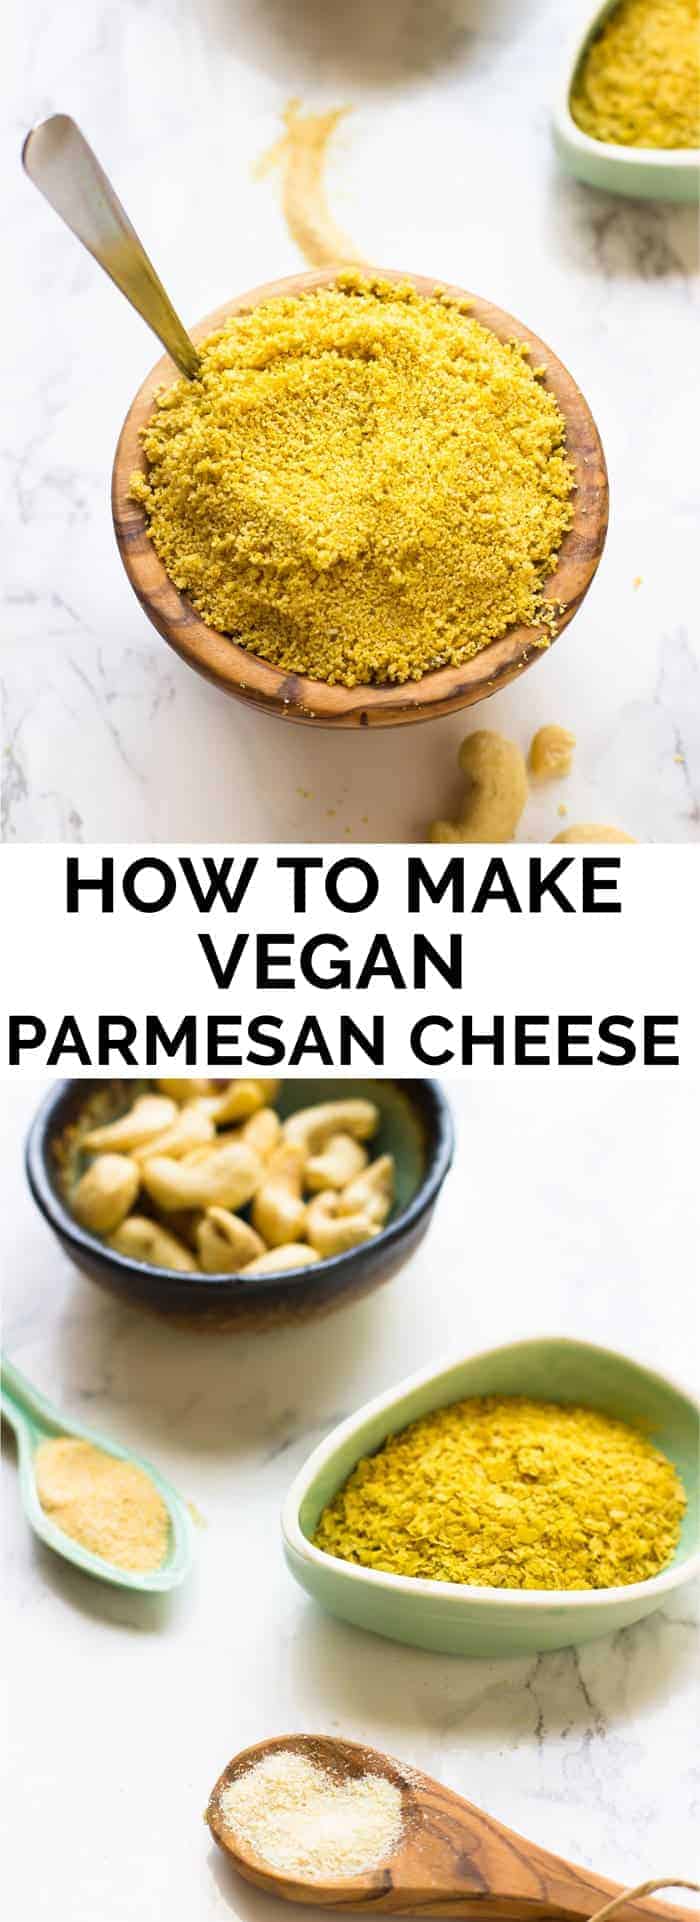 Learn how to make Vegan Parmesan Cheese with just 5 ingredients in just 5 minutes! Quick, easy and tastes AMAZING!